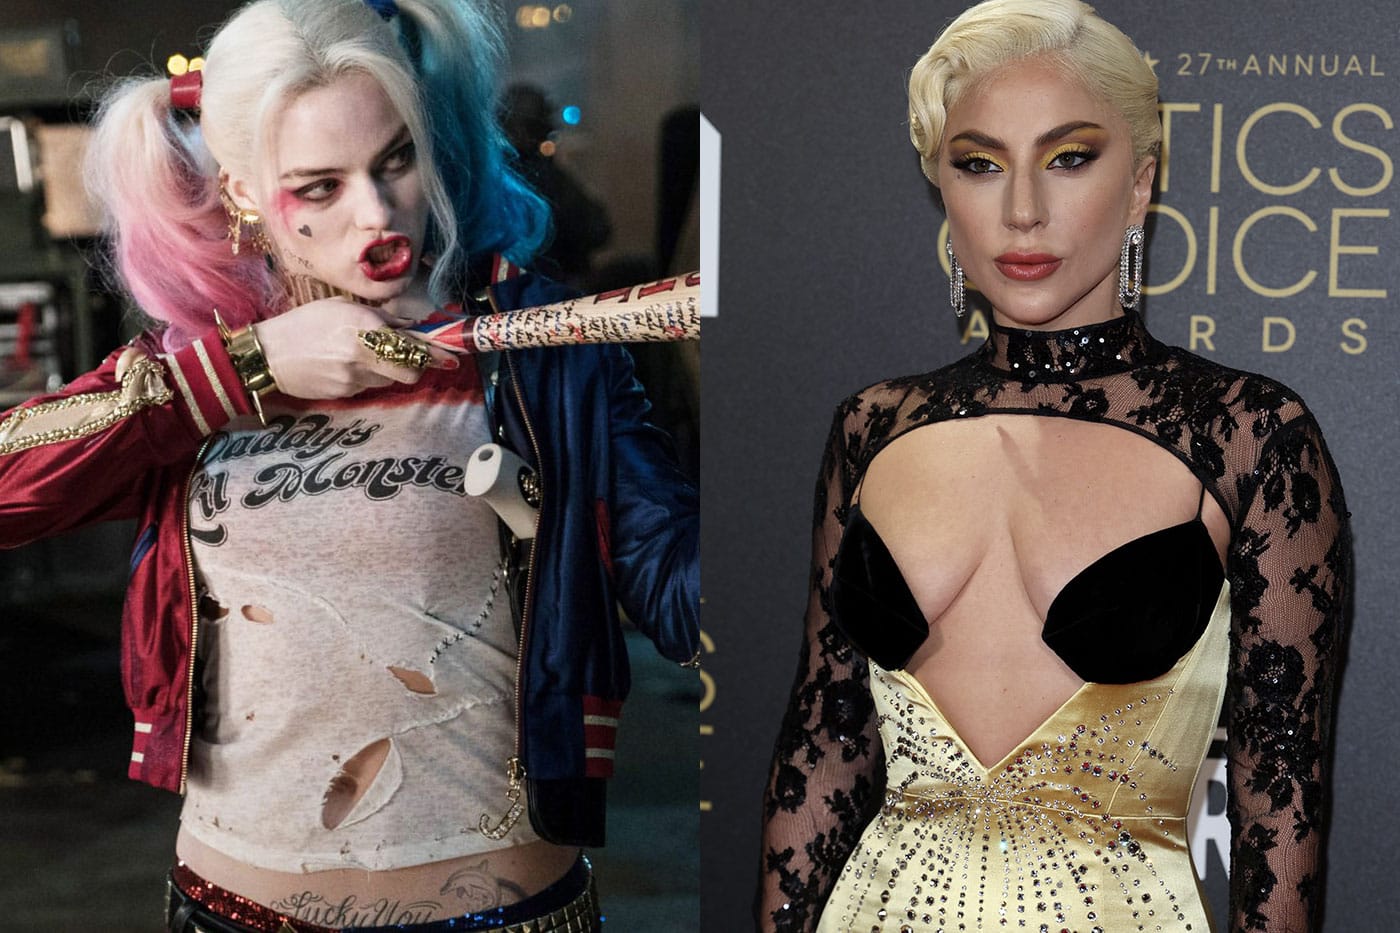 conny sjostrom recommends margot robbie harley quinn tits pic